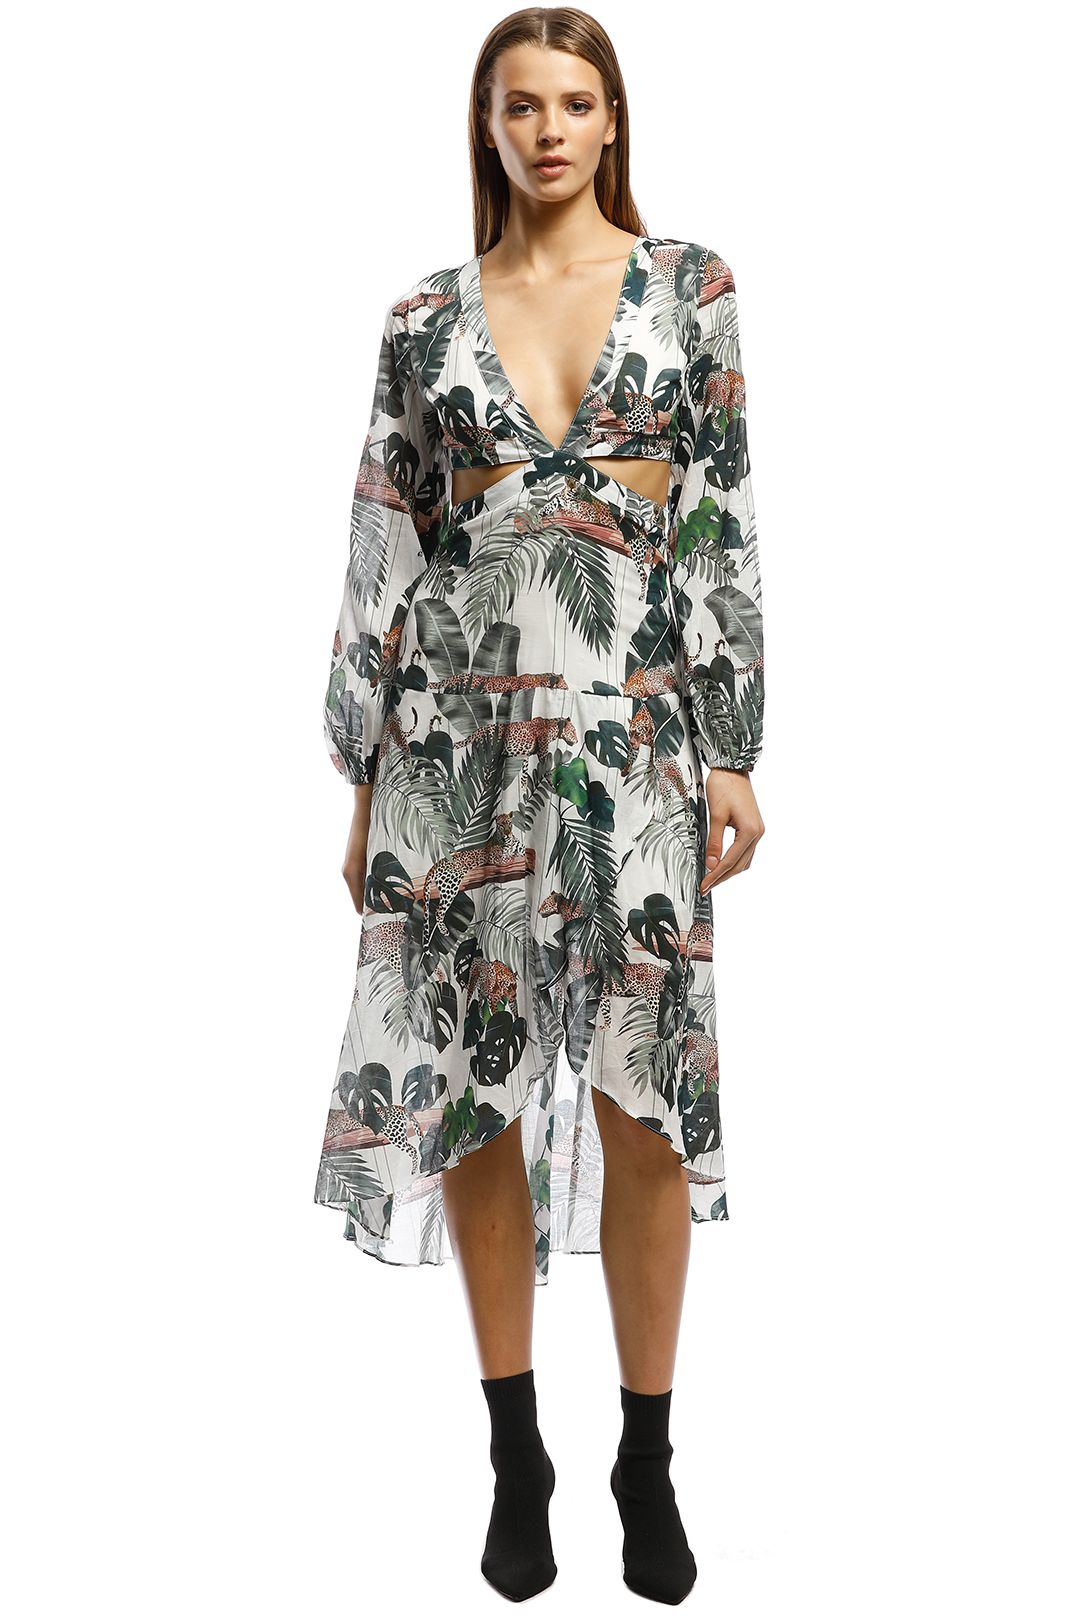 Suboo - Xenia Cut Out Balloon Sleeve Dress - Tropical Print - Front